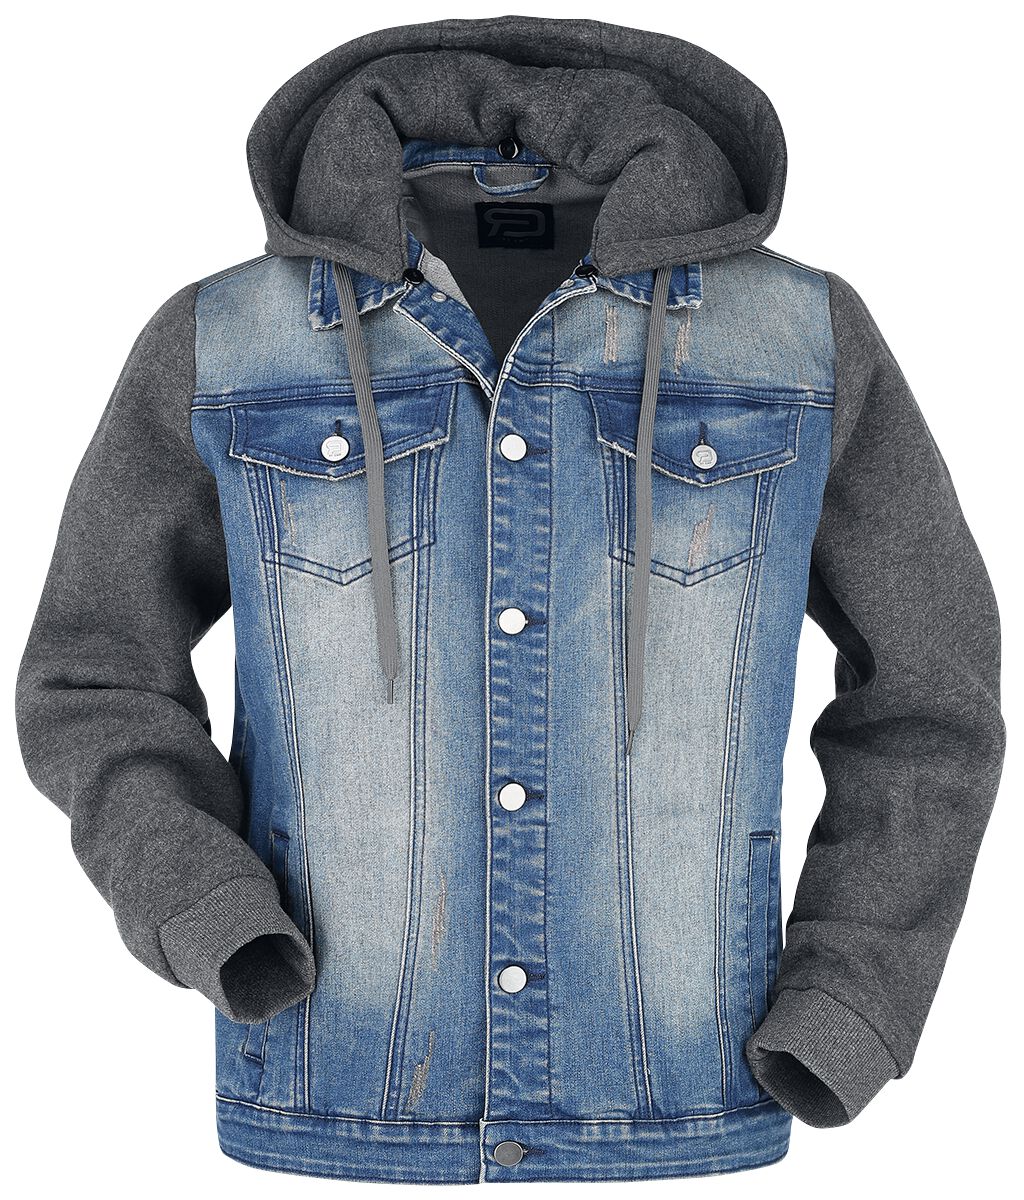 Image of Giubbetto di jeans di RED by EMP - Denim Jacket with Hood - S a 5XL - Uomo - blu/grigio